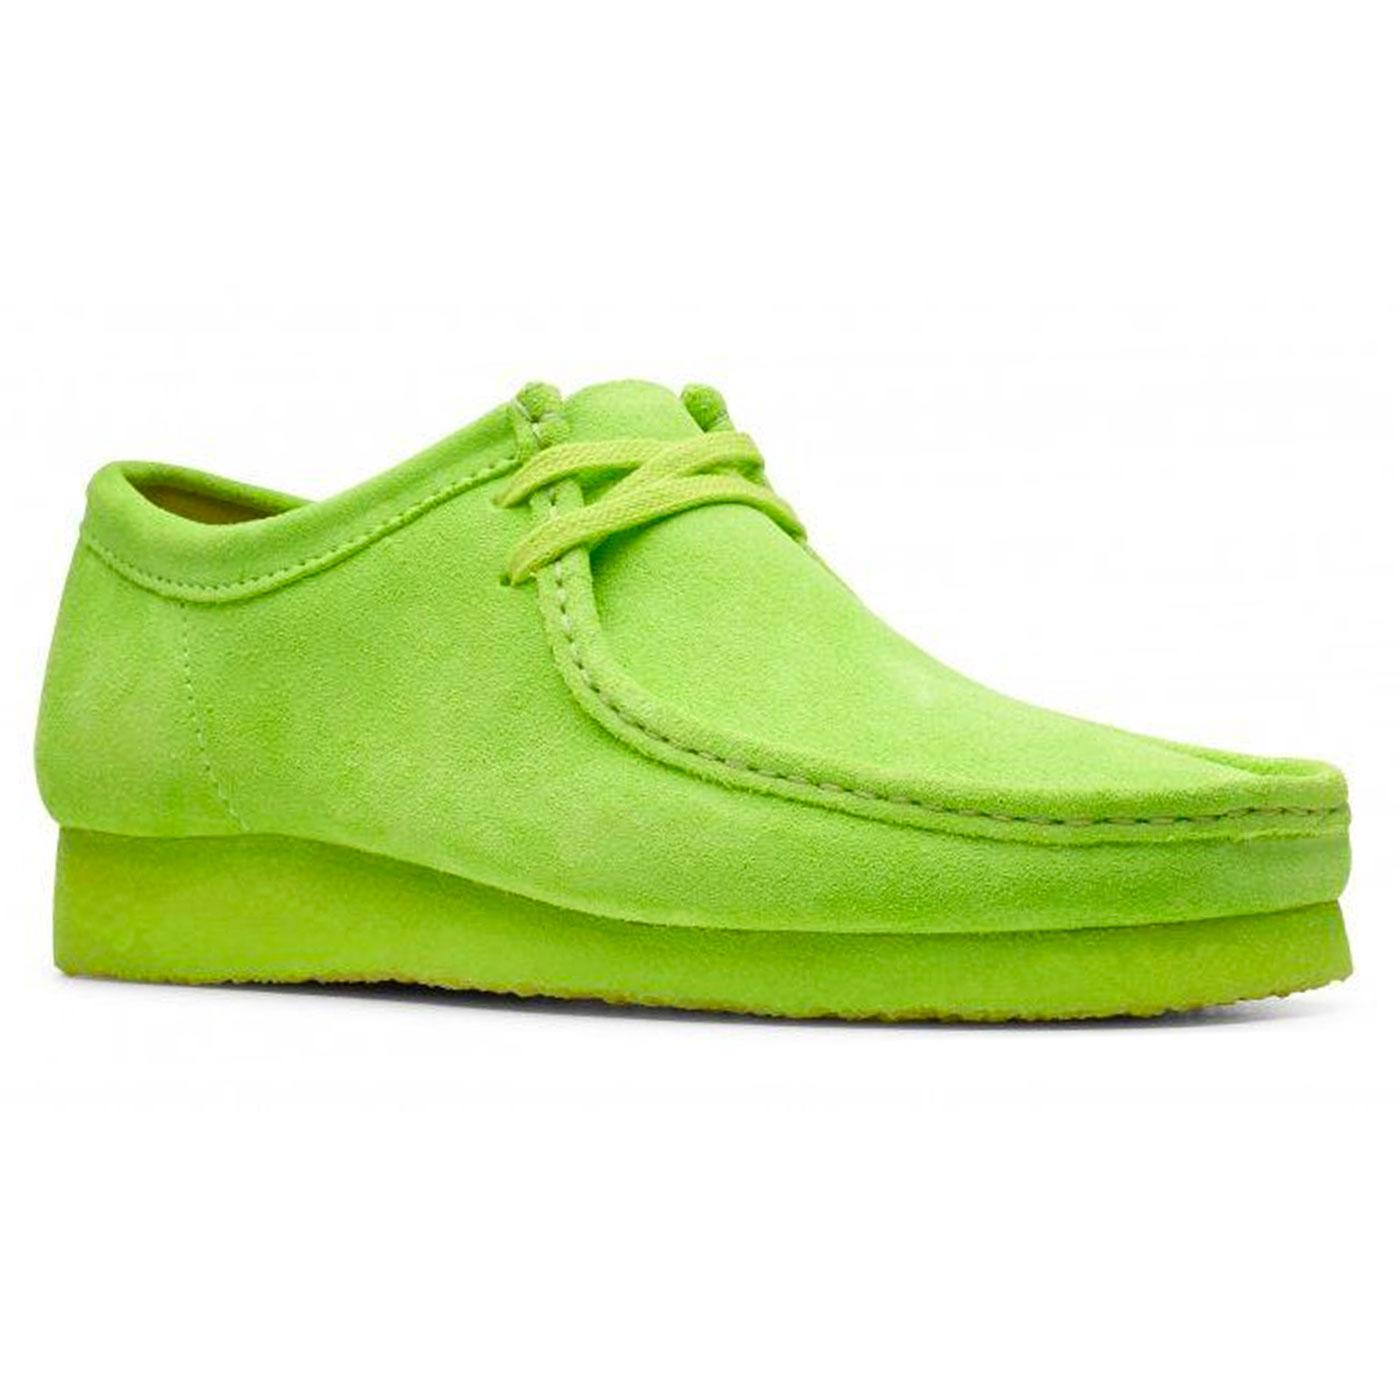 CLARKS ORIGINALS Wallabee Moccasin Shoes in Lime Suede